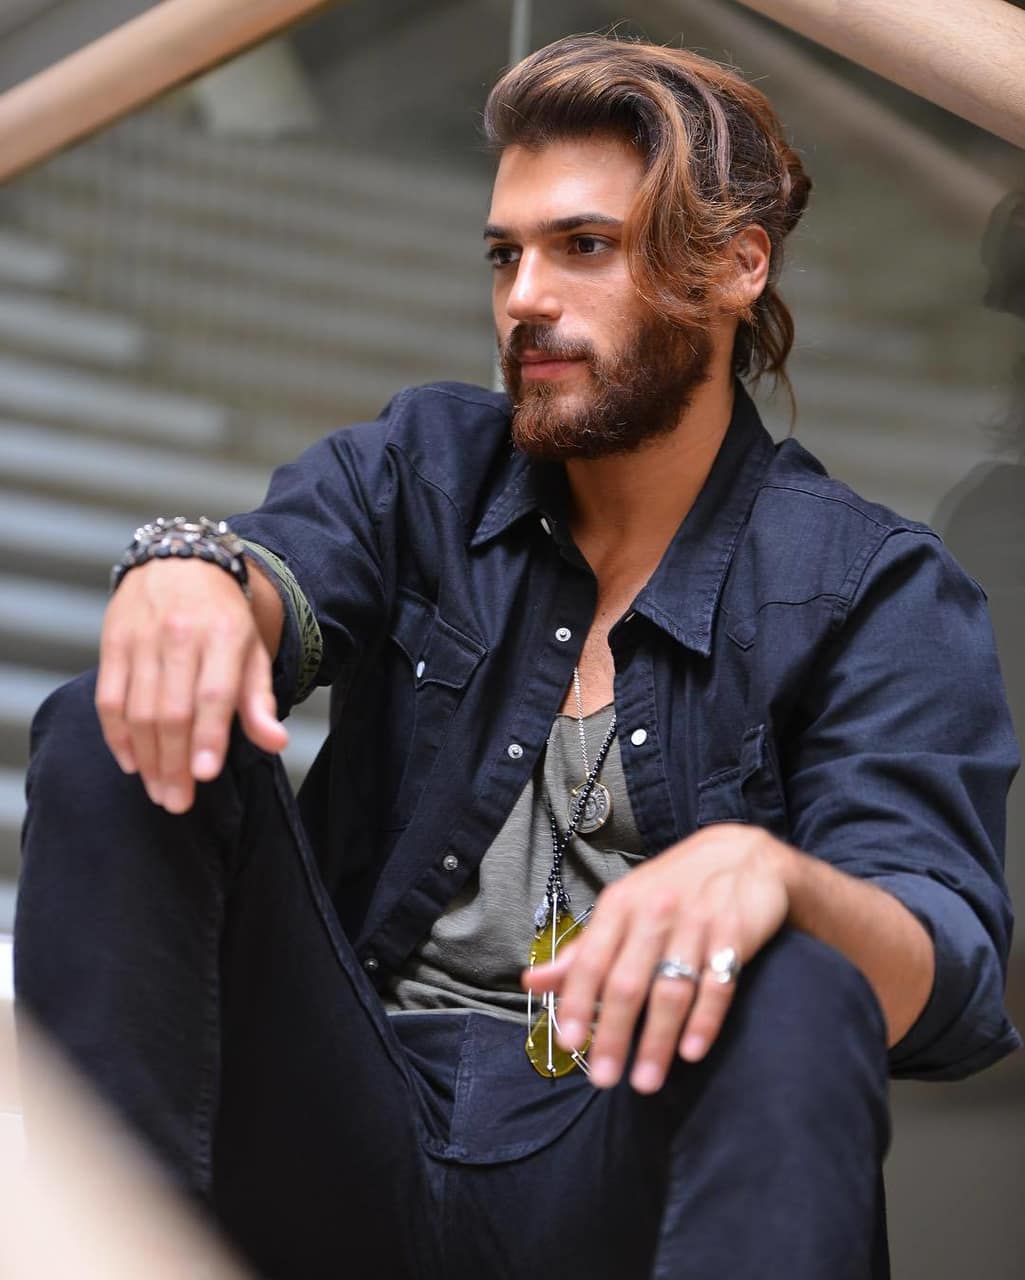 Image About Can Yaman On We Heart It See More